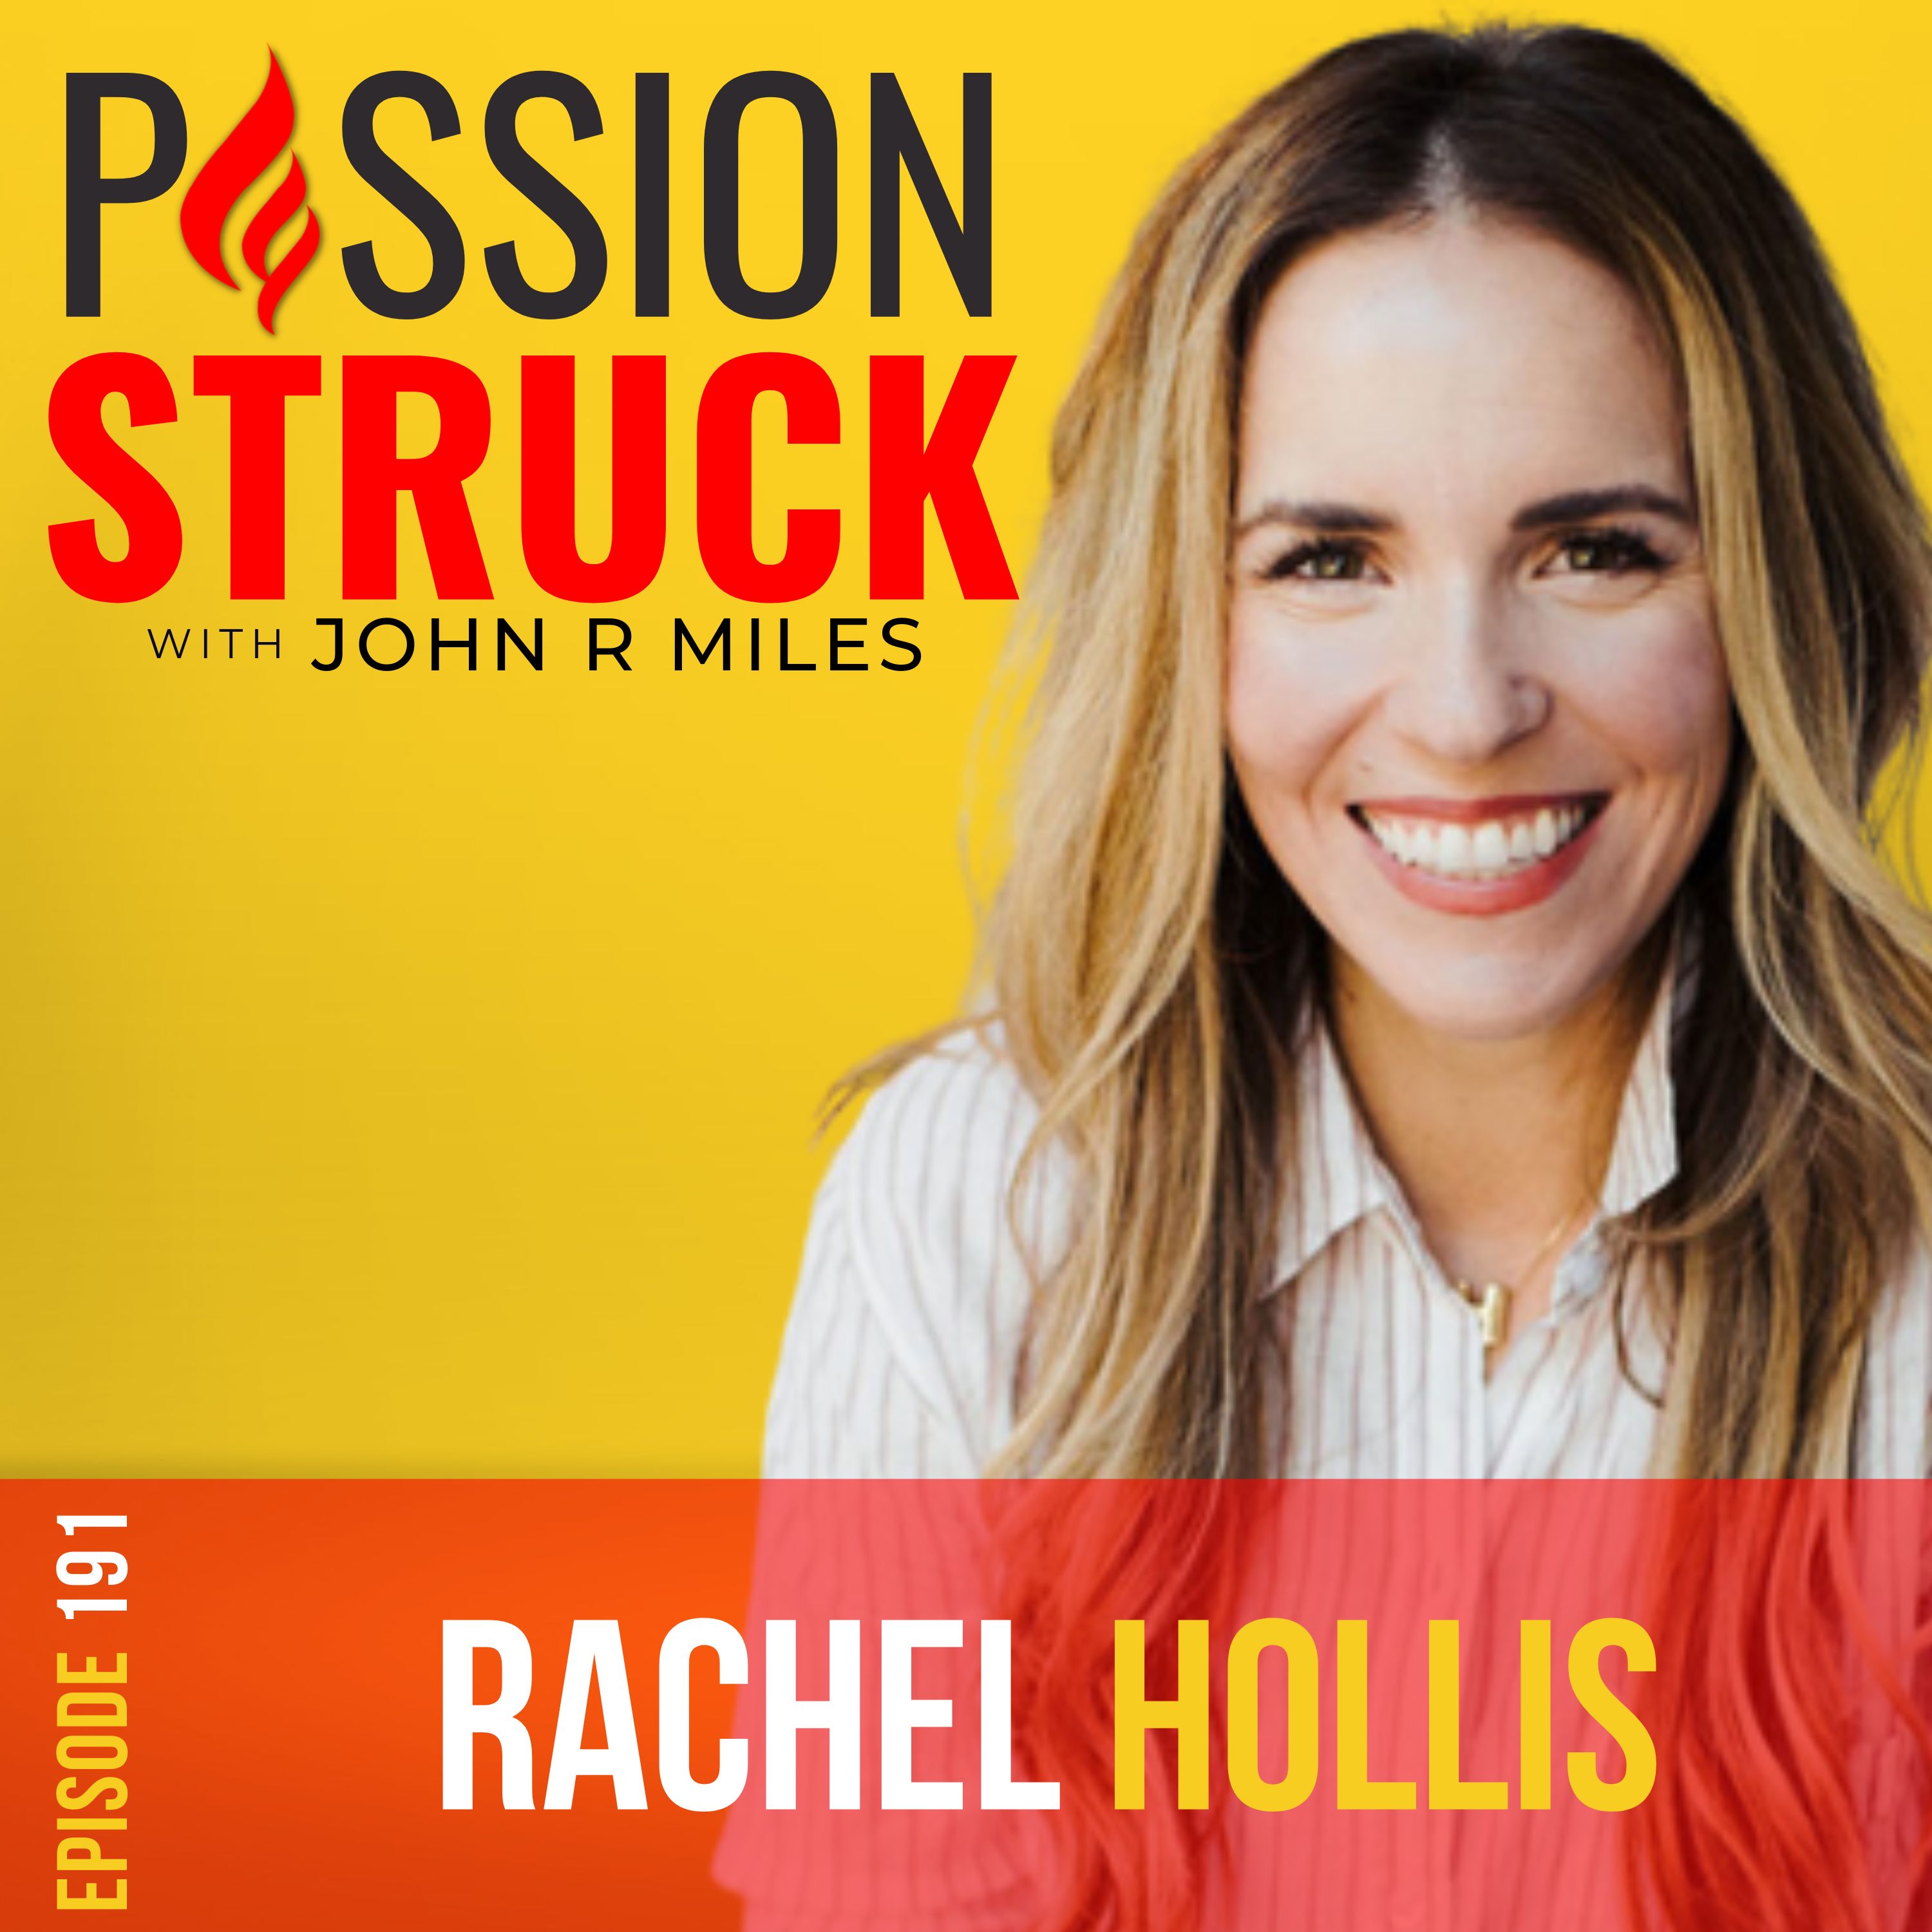 Passion struck podcast with Rachel Hollis on how to find your passion in life